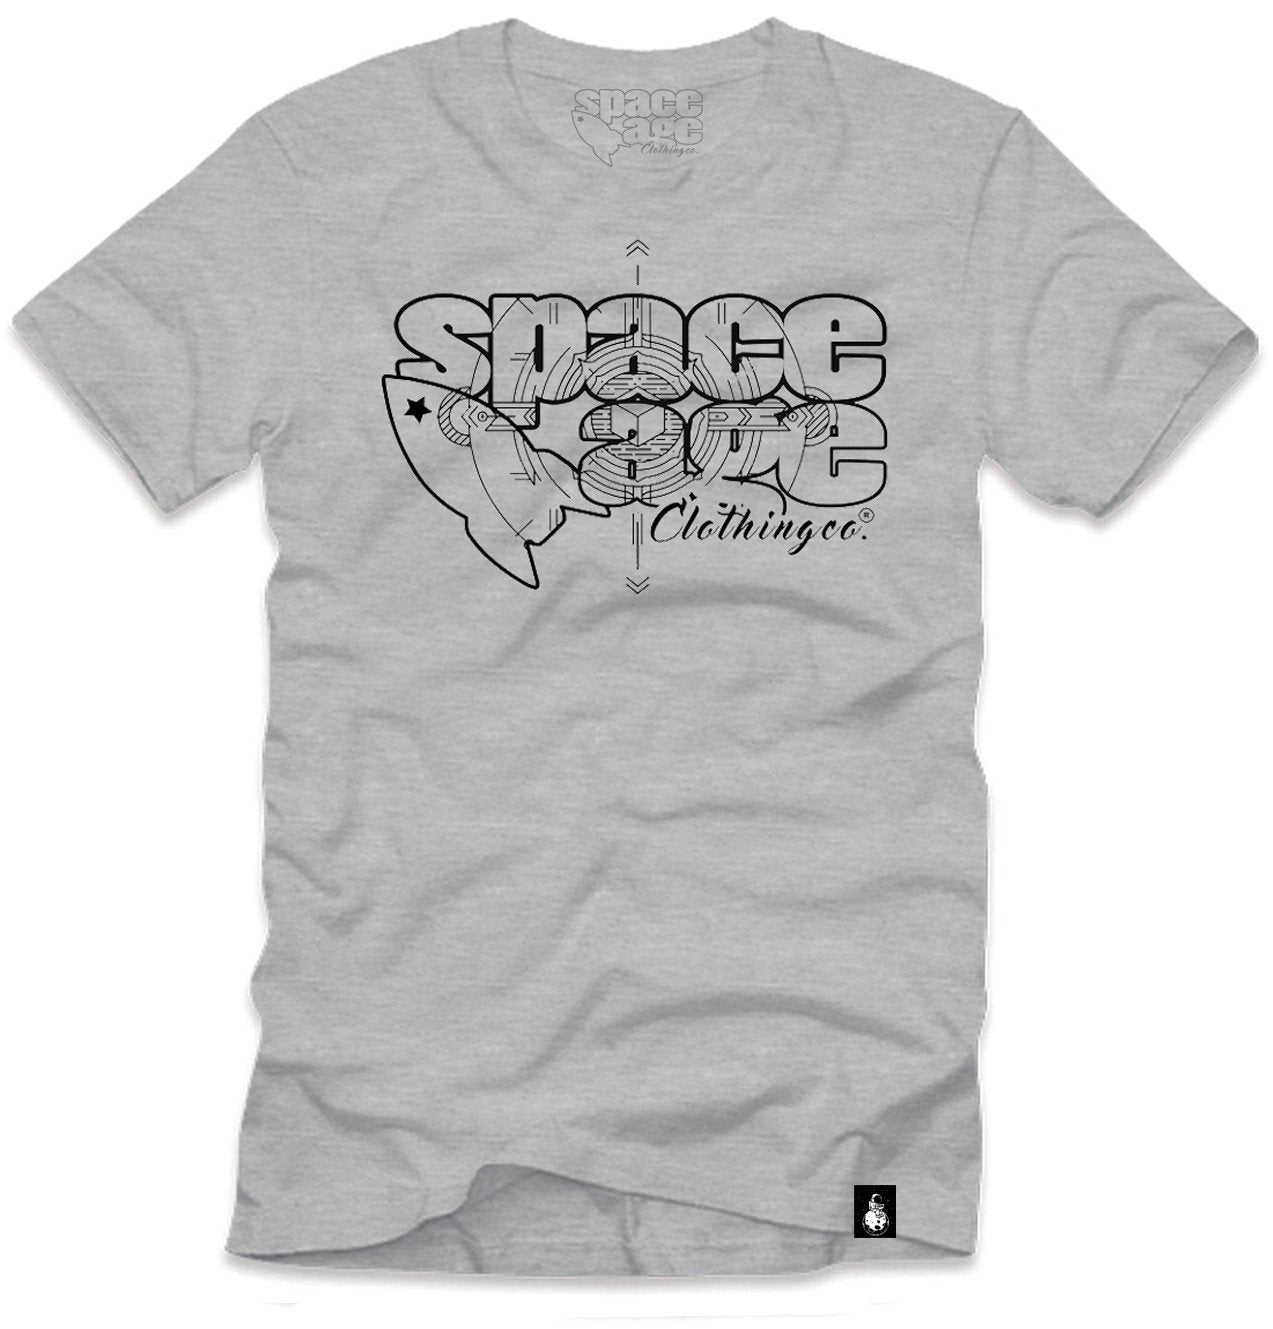 Space Age Clothing Co. T- Shirt - Grey / Black